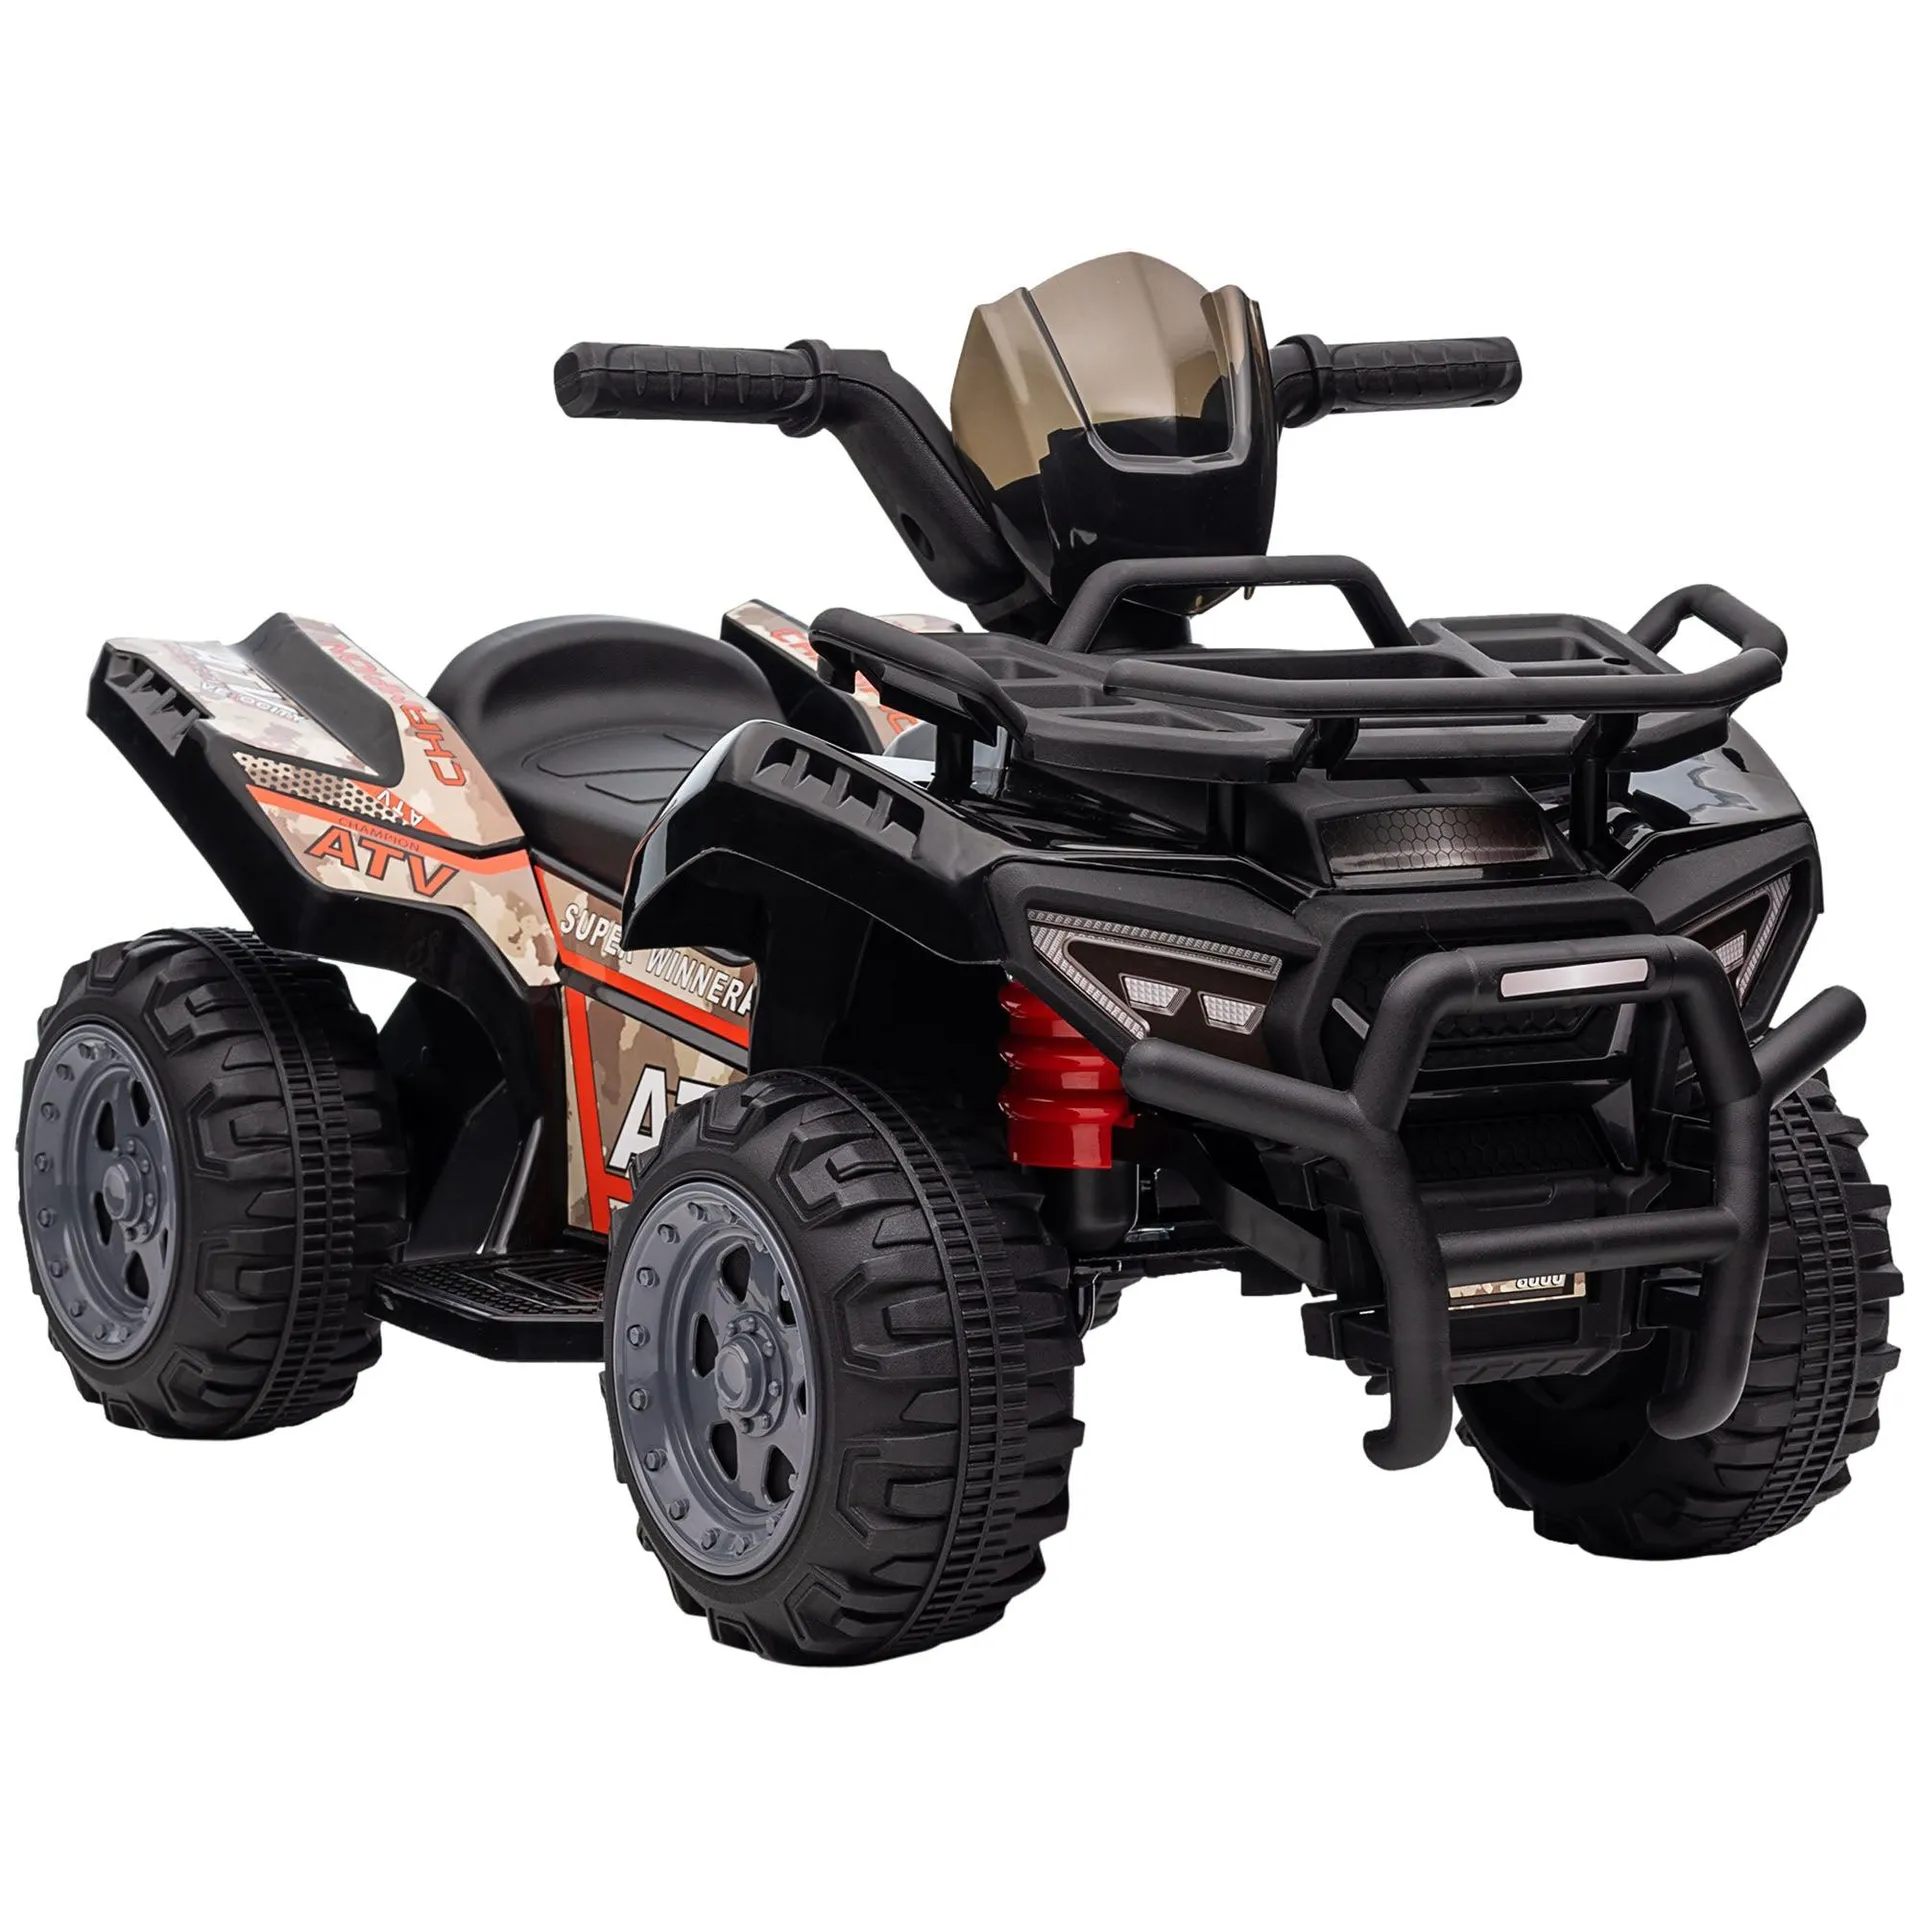 Maplin Plus 6V Kids Electric Ride on Toy ATV Quad Bike with Music & Headlights for 18-36 Months